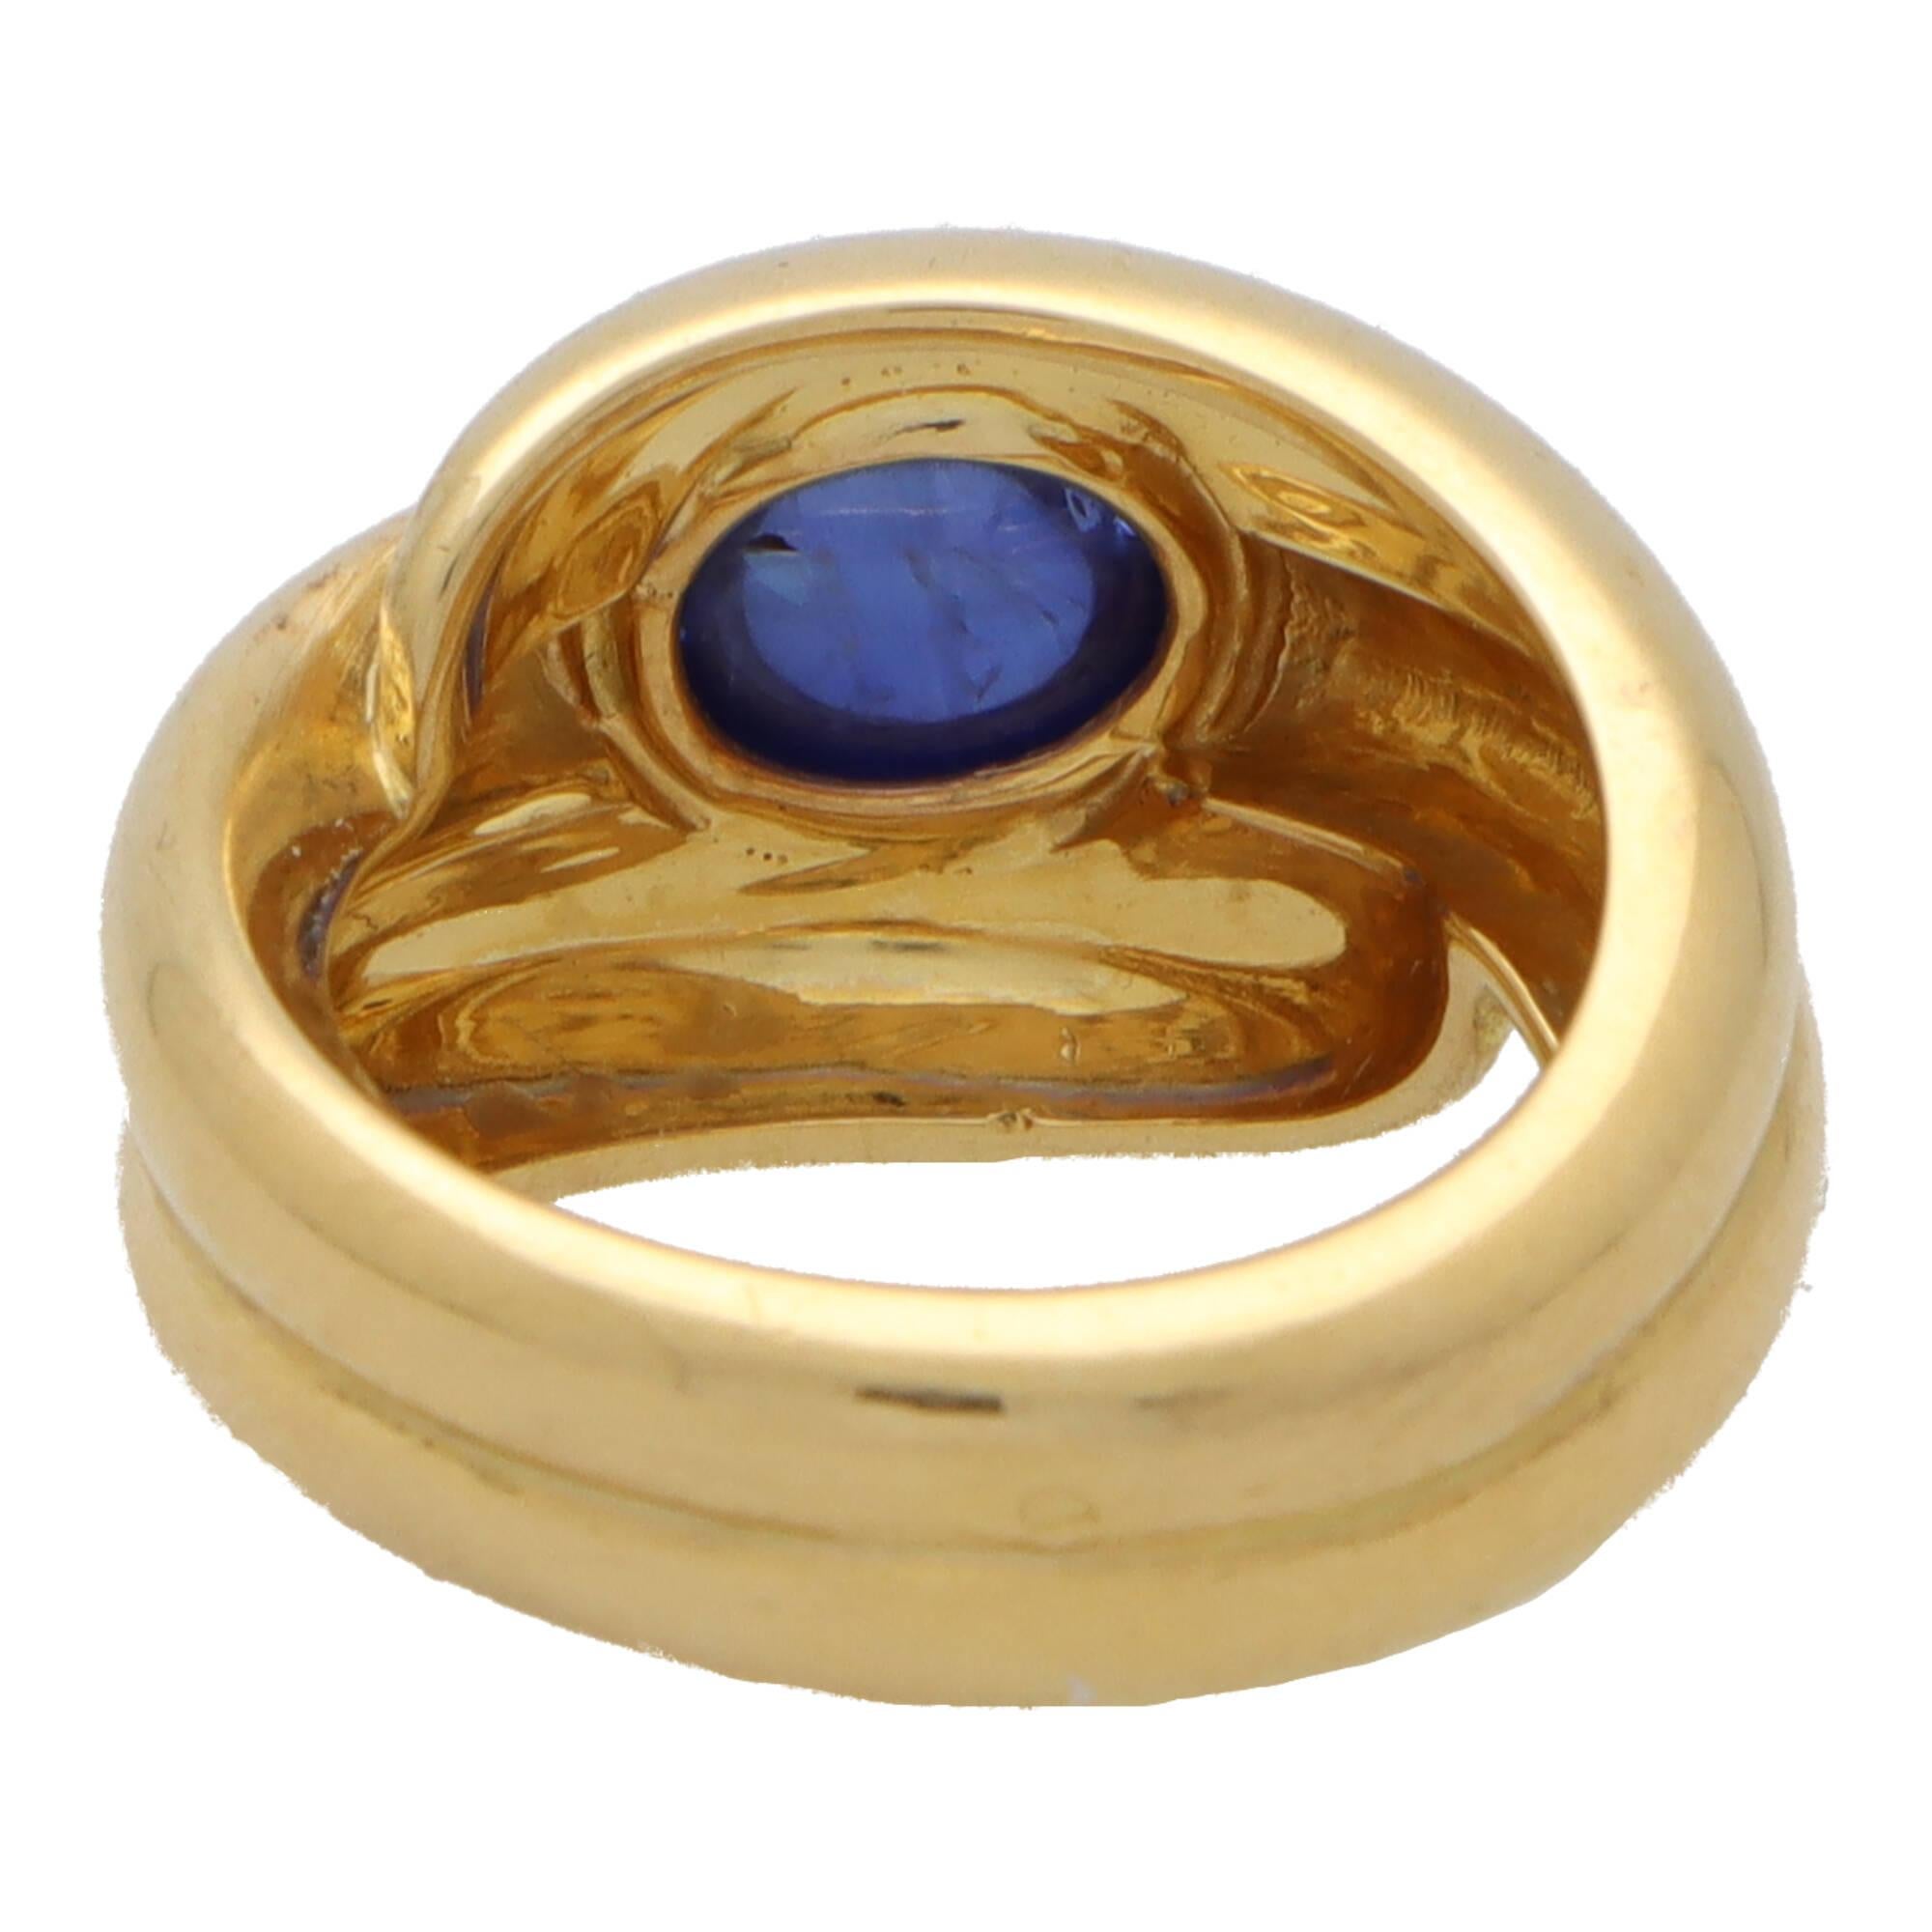 Vintage French Bombé Cabochon Sapphire Ring in 18k Gelbgold im Angebot 1